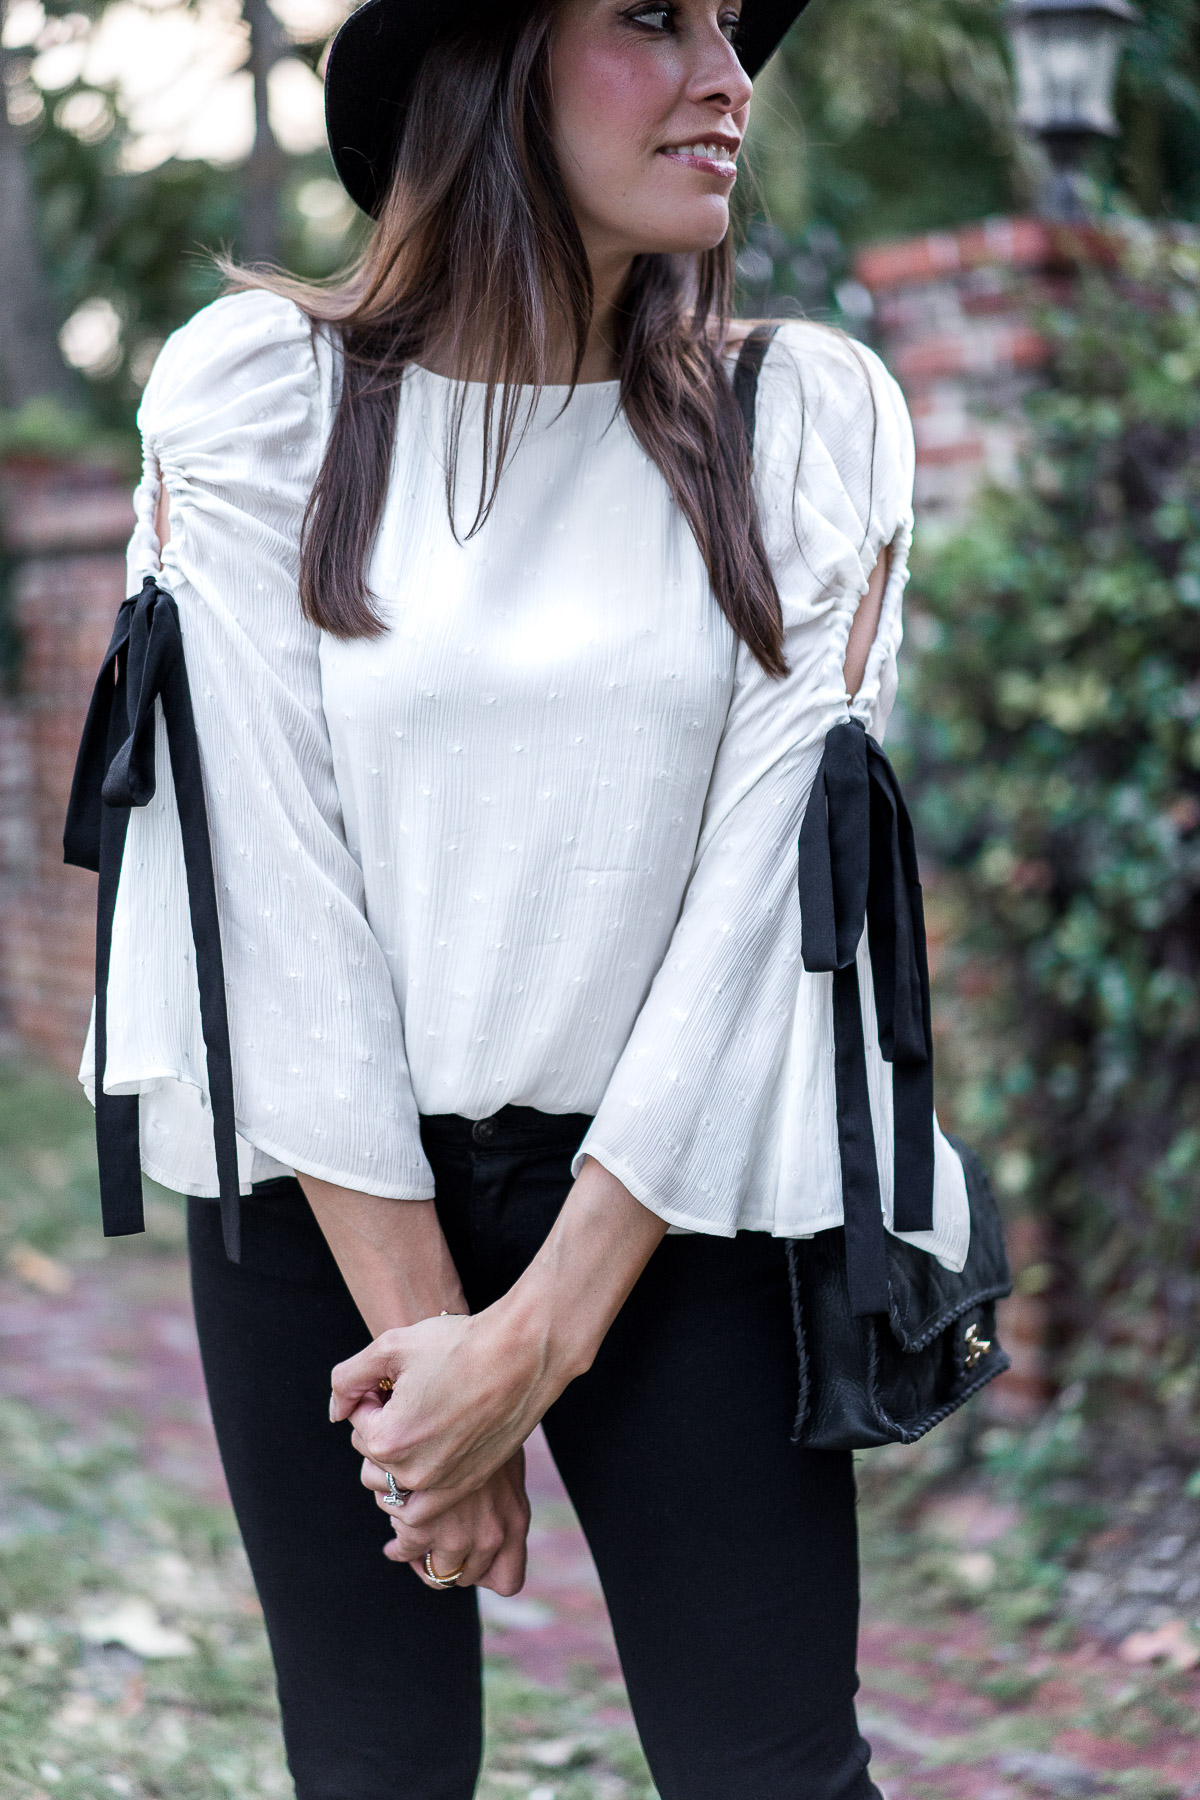 Fluttery bell sleeve top from Club Monaco with black tie details styled by Amanda of A Glam Lifestyle blog